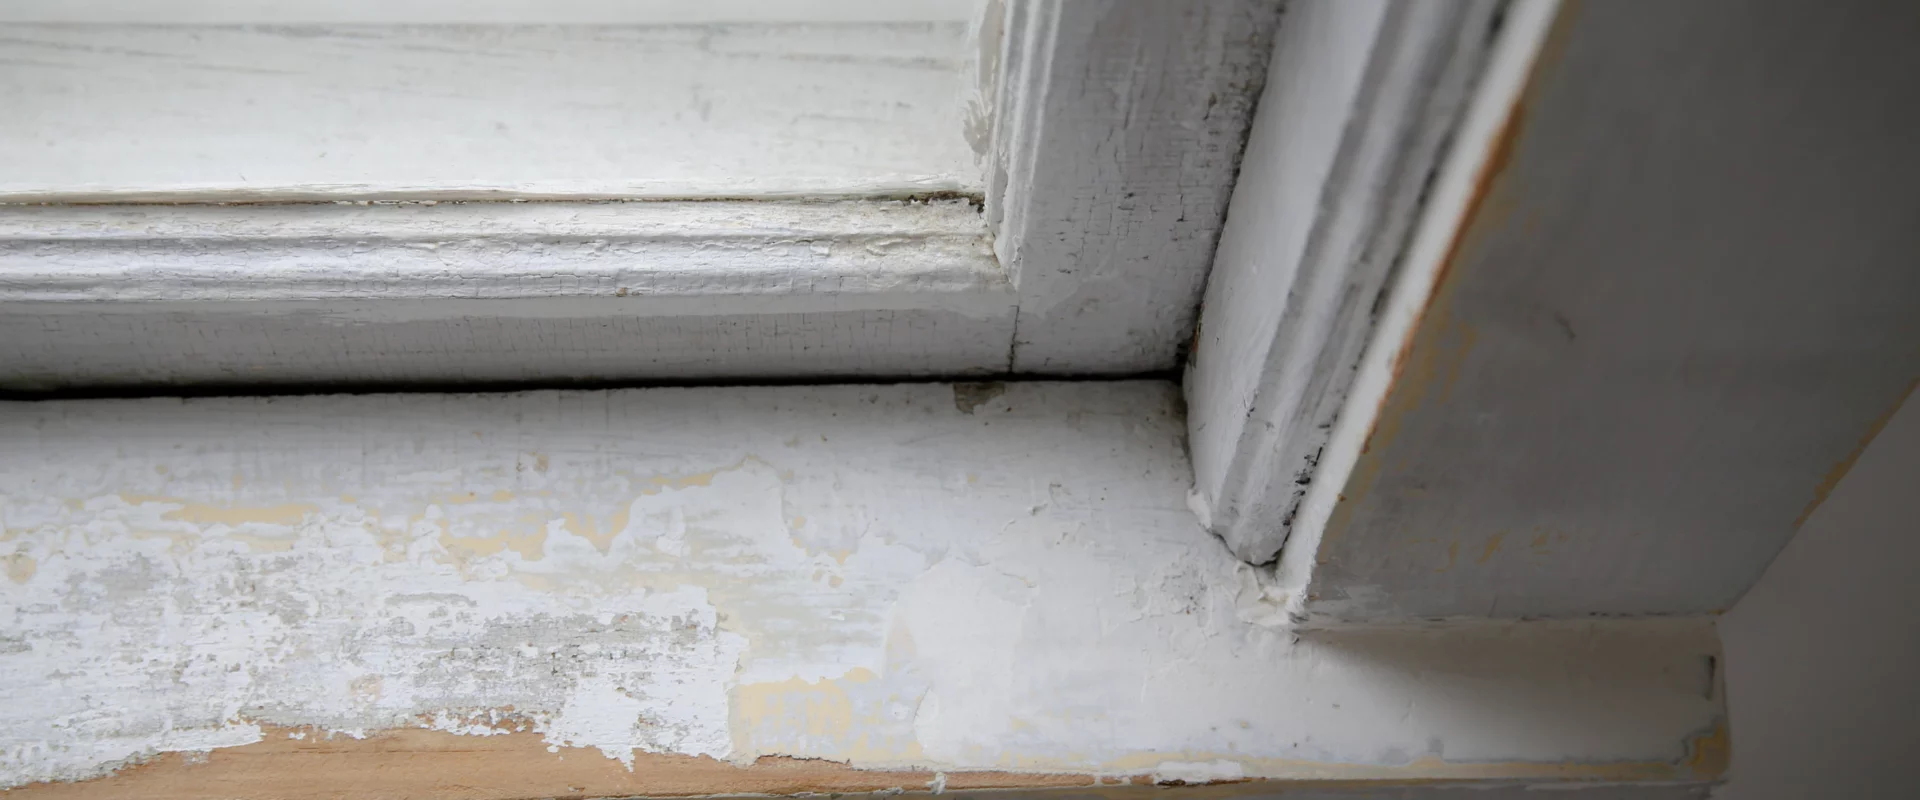 a deteriorated lead paint on the window sill